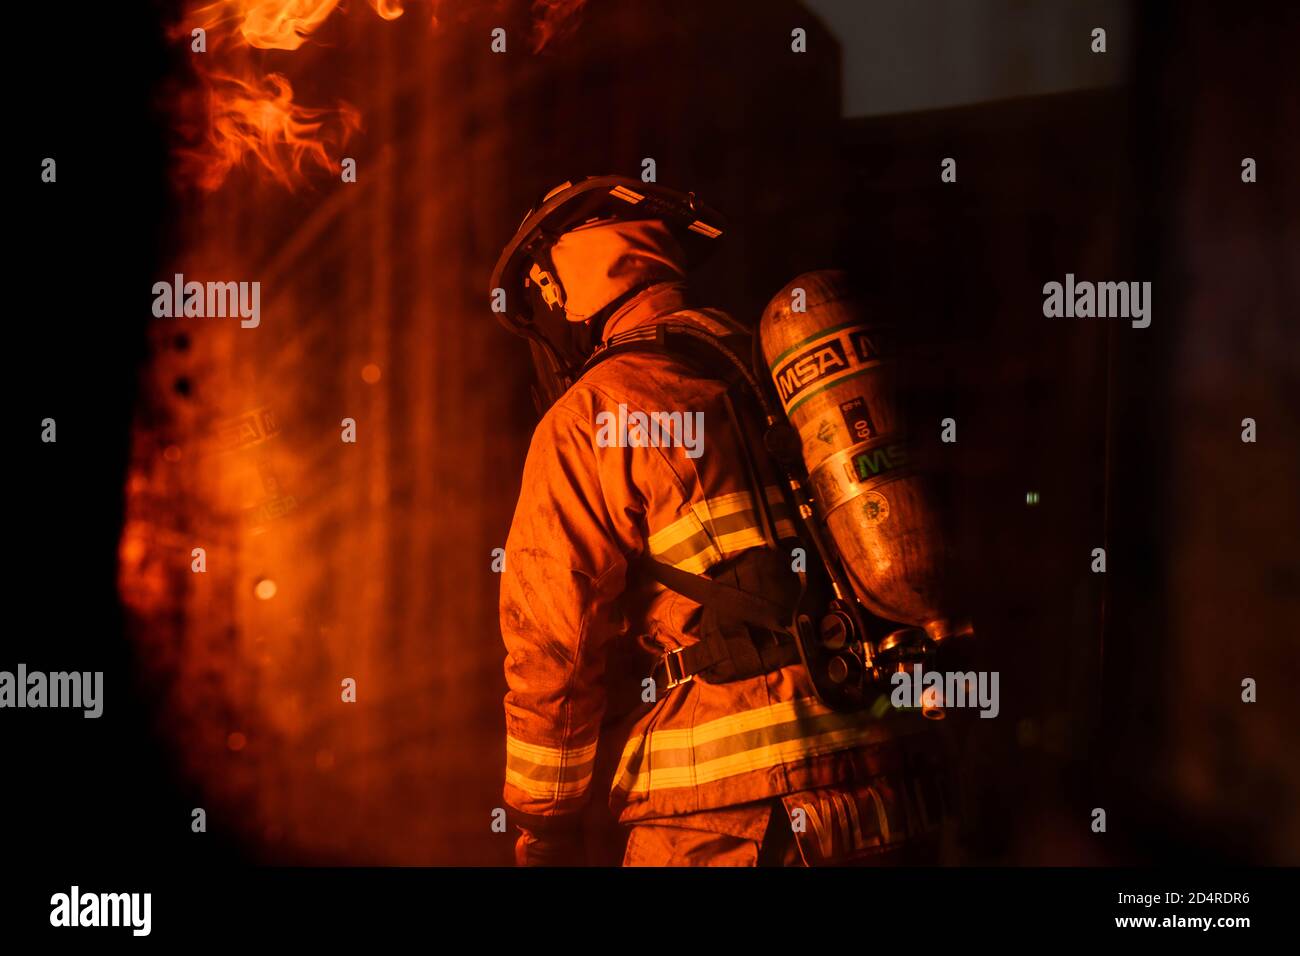 U.S. Senior Airman Jose Villalobos, 31st Civil Engineer Squadron fire protection journeyman, participates in a live fire training exercise at Aviano Air Base, Italy, Oct. 29, 2019. Live fire training is conducted in a burn building, which is a structure built to be intentionally burned for firefighter training. (U.S. Air Force photo by Airman Thomas S. Keisler IV) Stock Photo